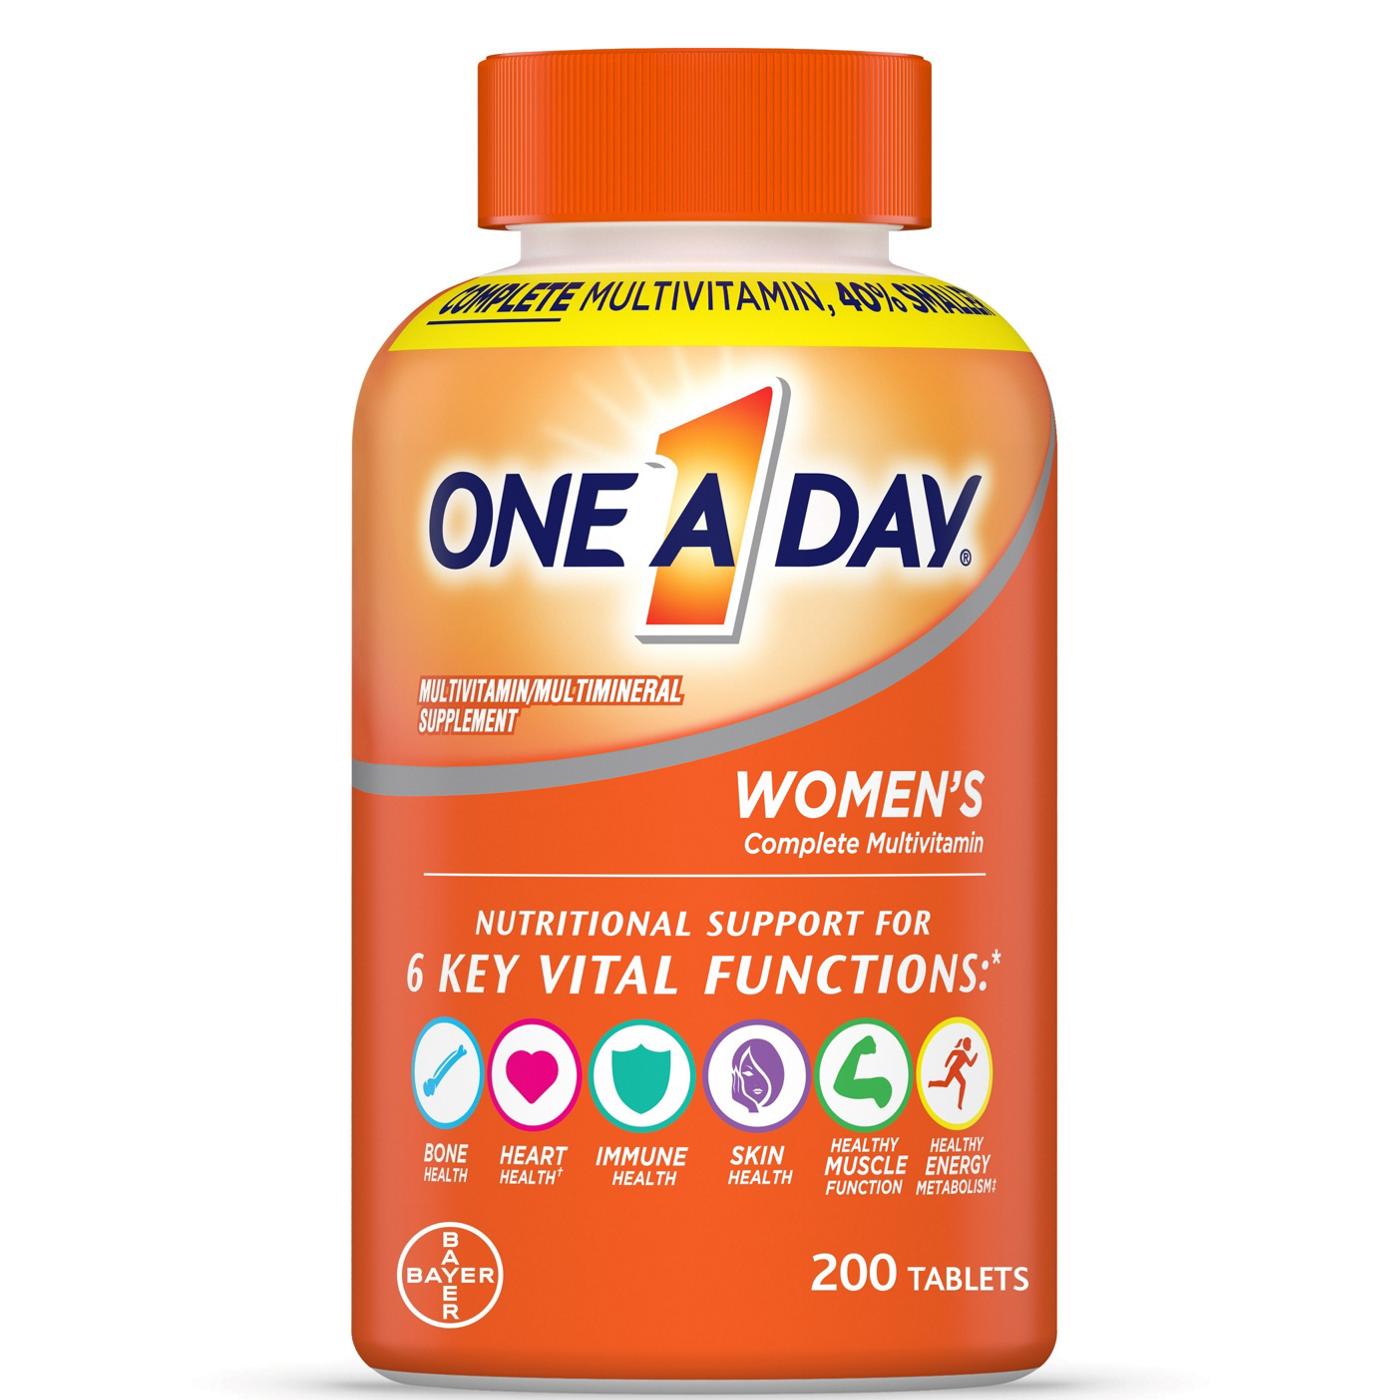 One A Day Women's Multivitamin Tablets; image 1 of 6